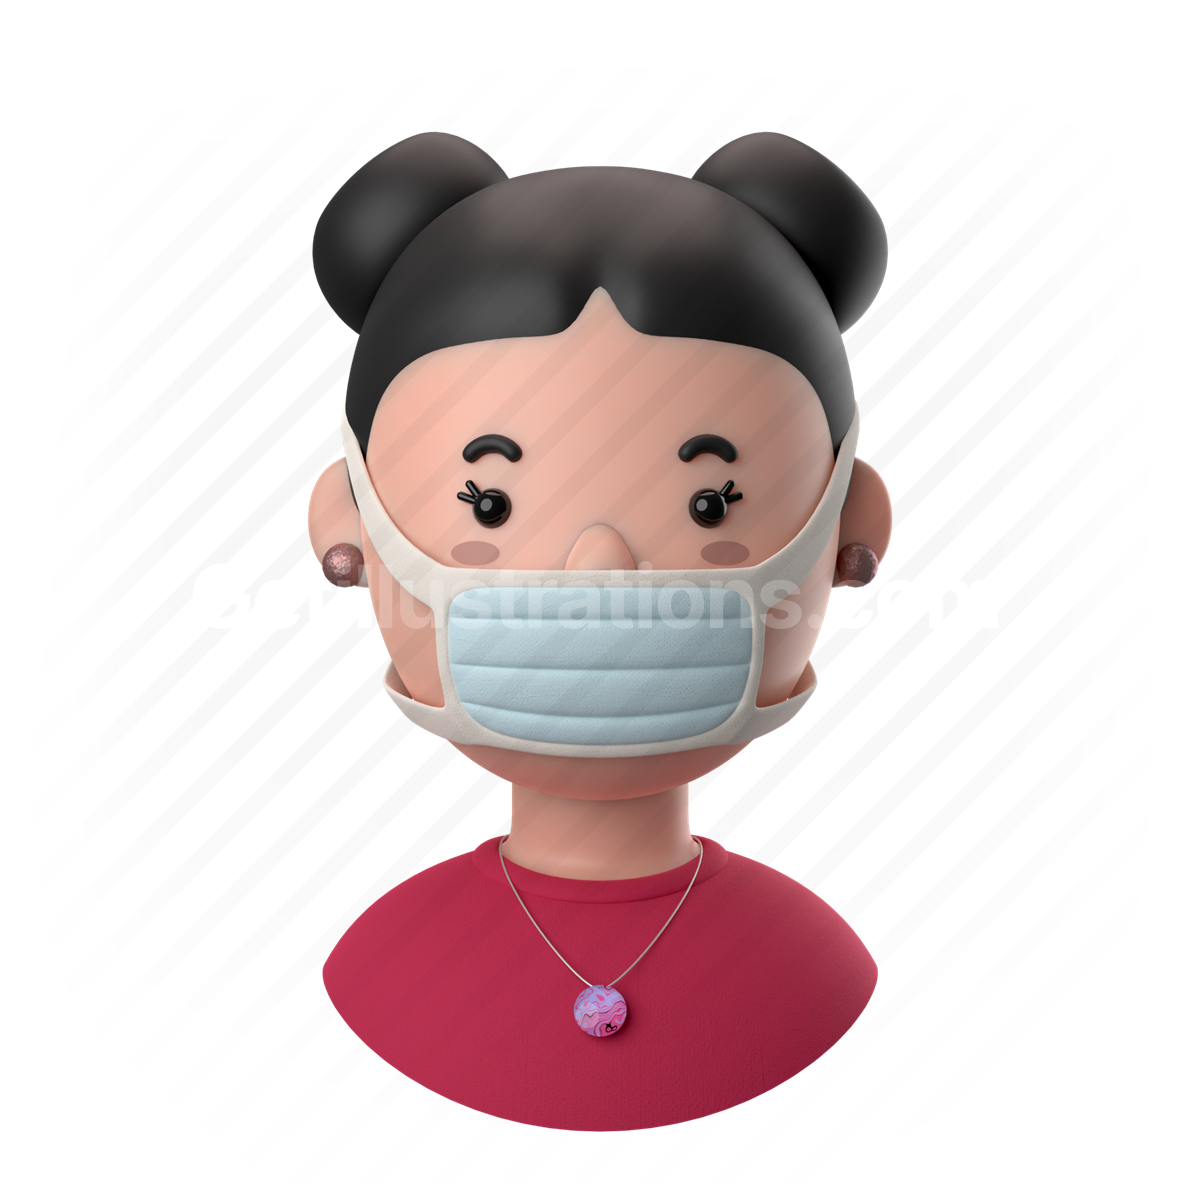 woman, female, person, people, buns, earrings, face mask, mask, necklace